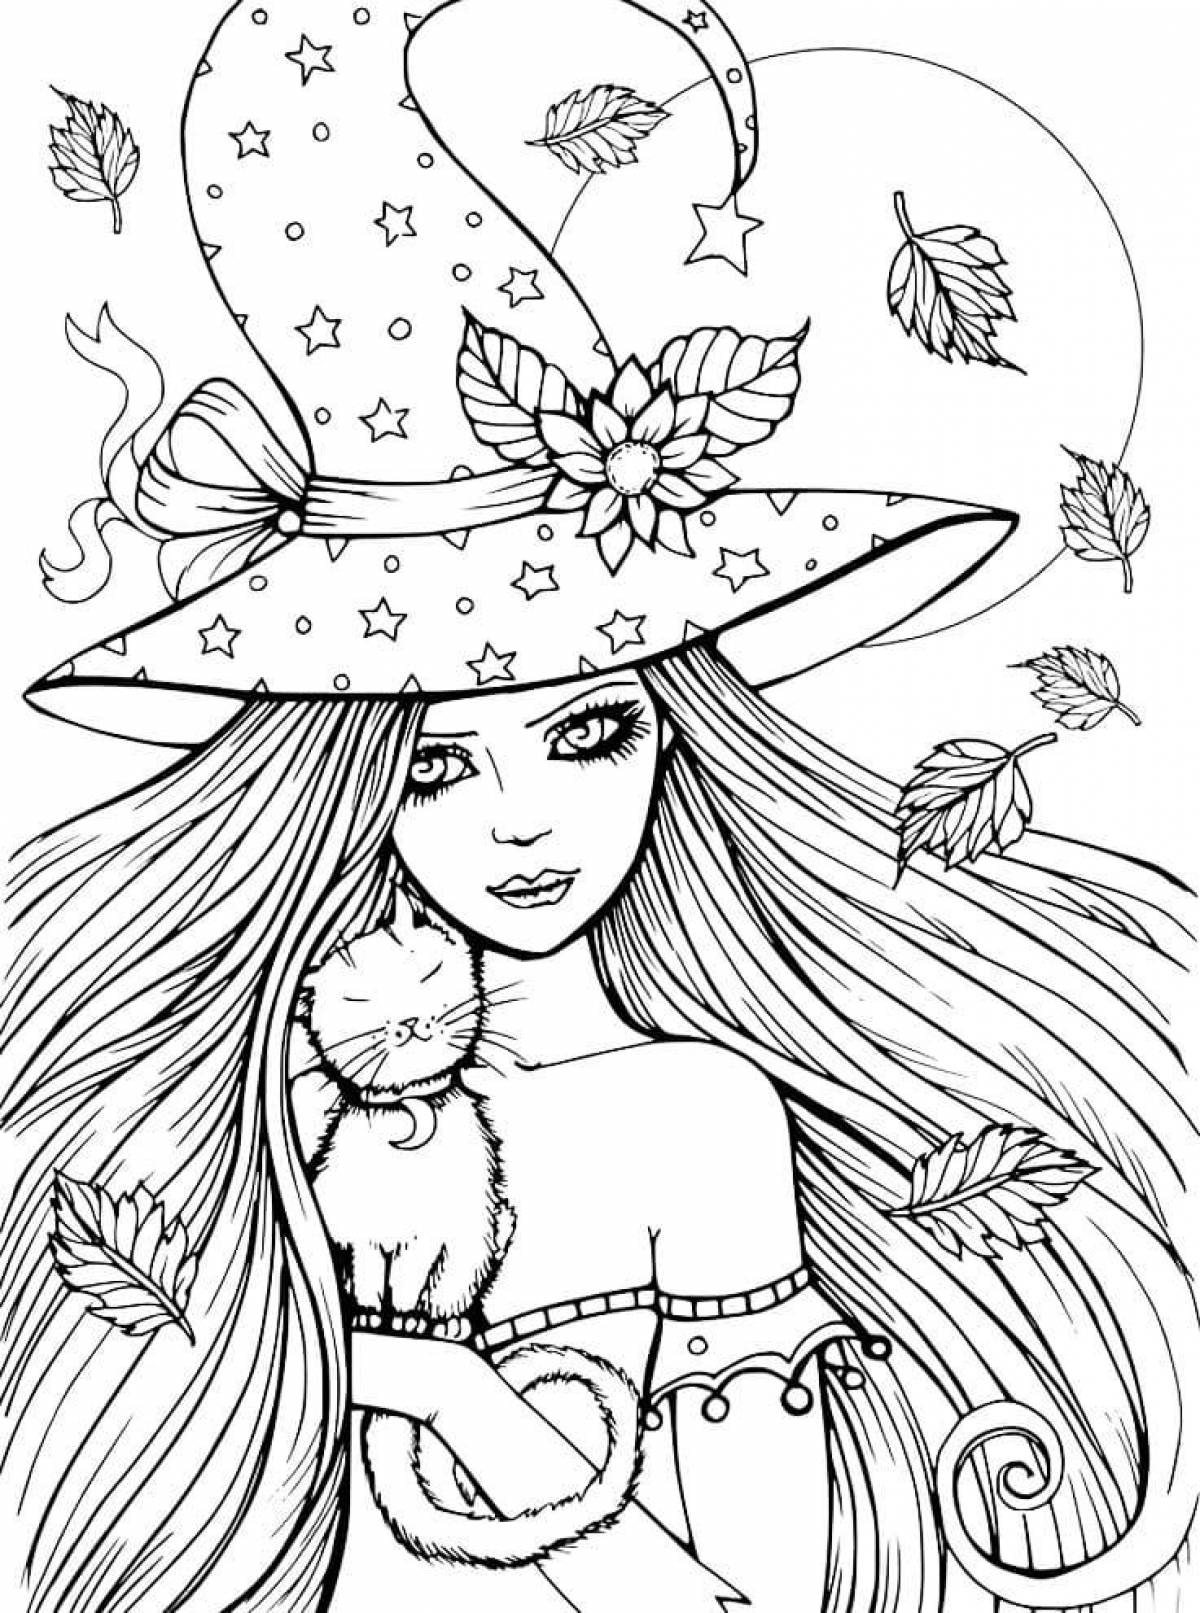 A fascinating coloring book for 18 years for girls